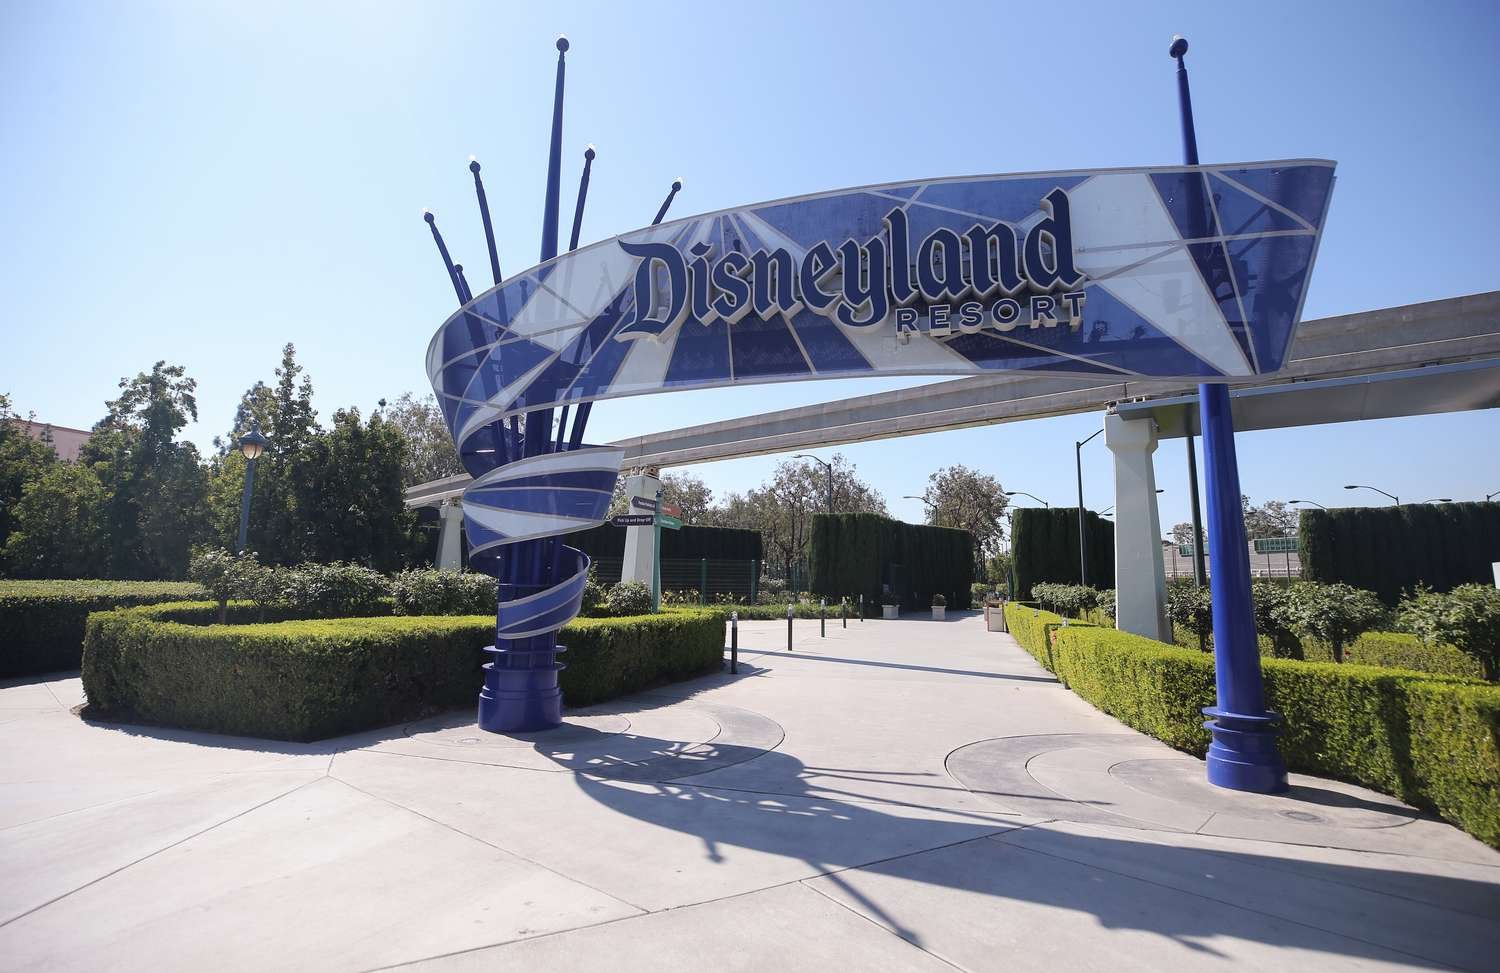 Planning Your Trip to Disneyland: Tips for First Time Visitors